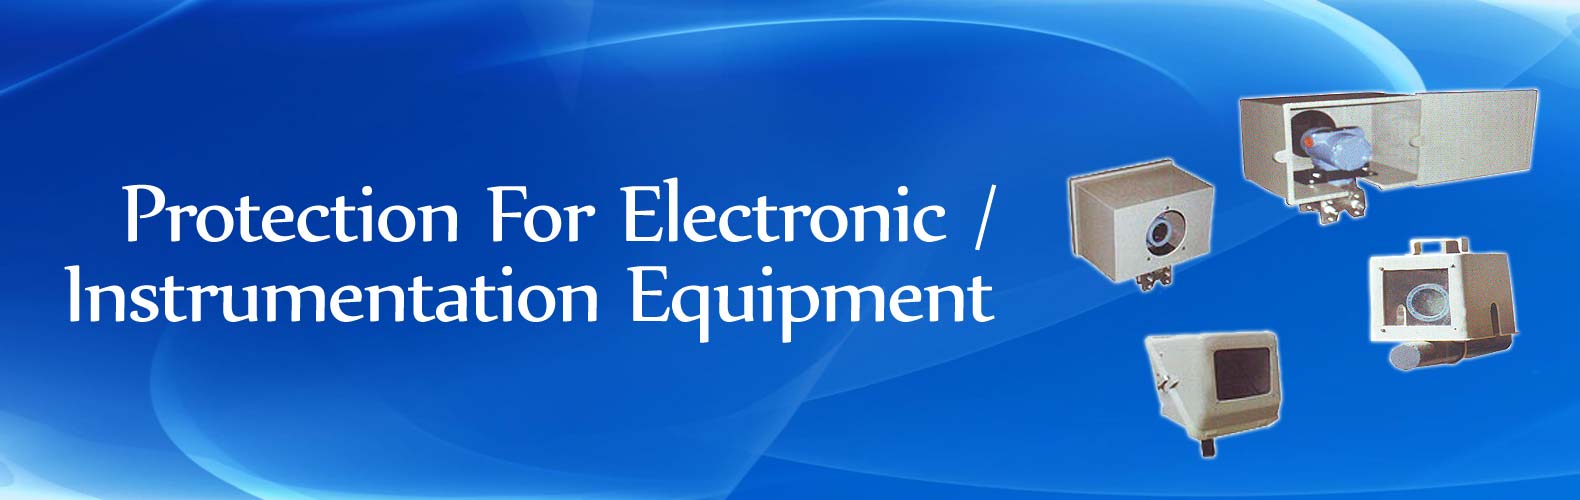 FRP PROTECTION for Electronics Equipment